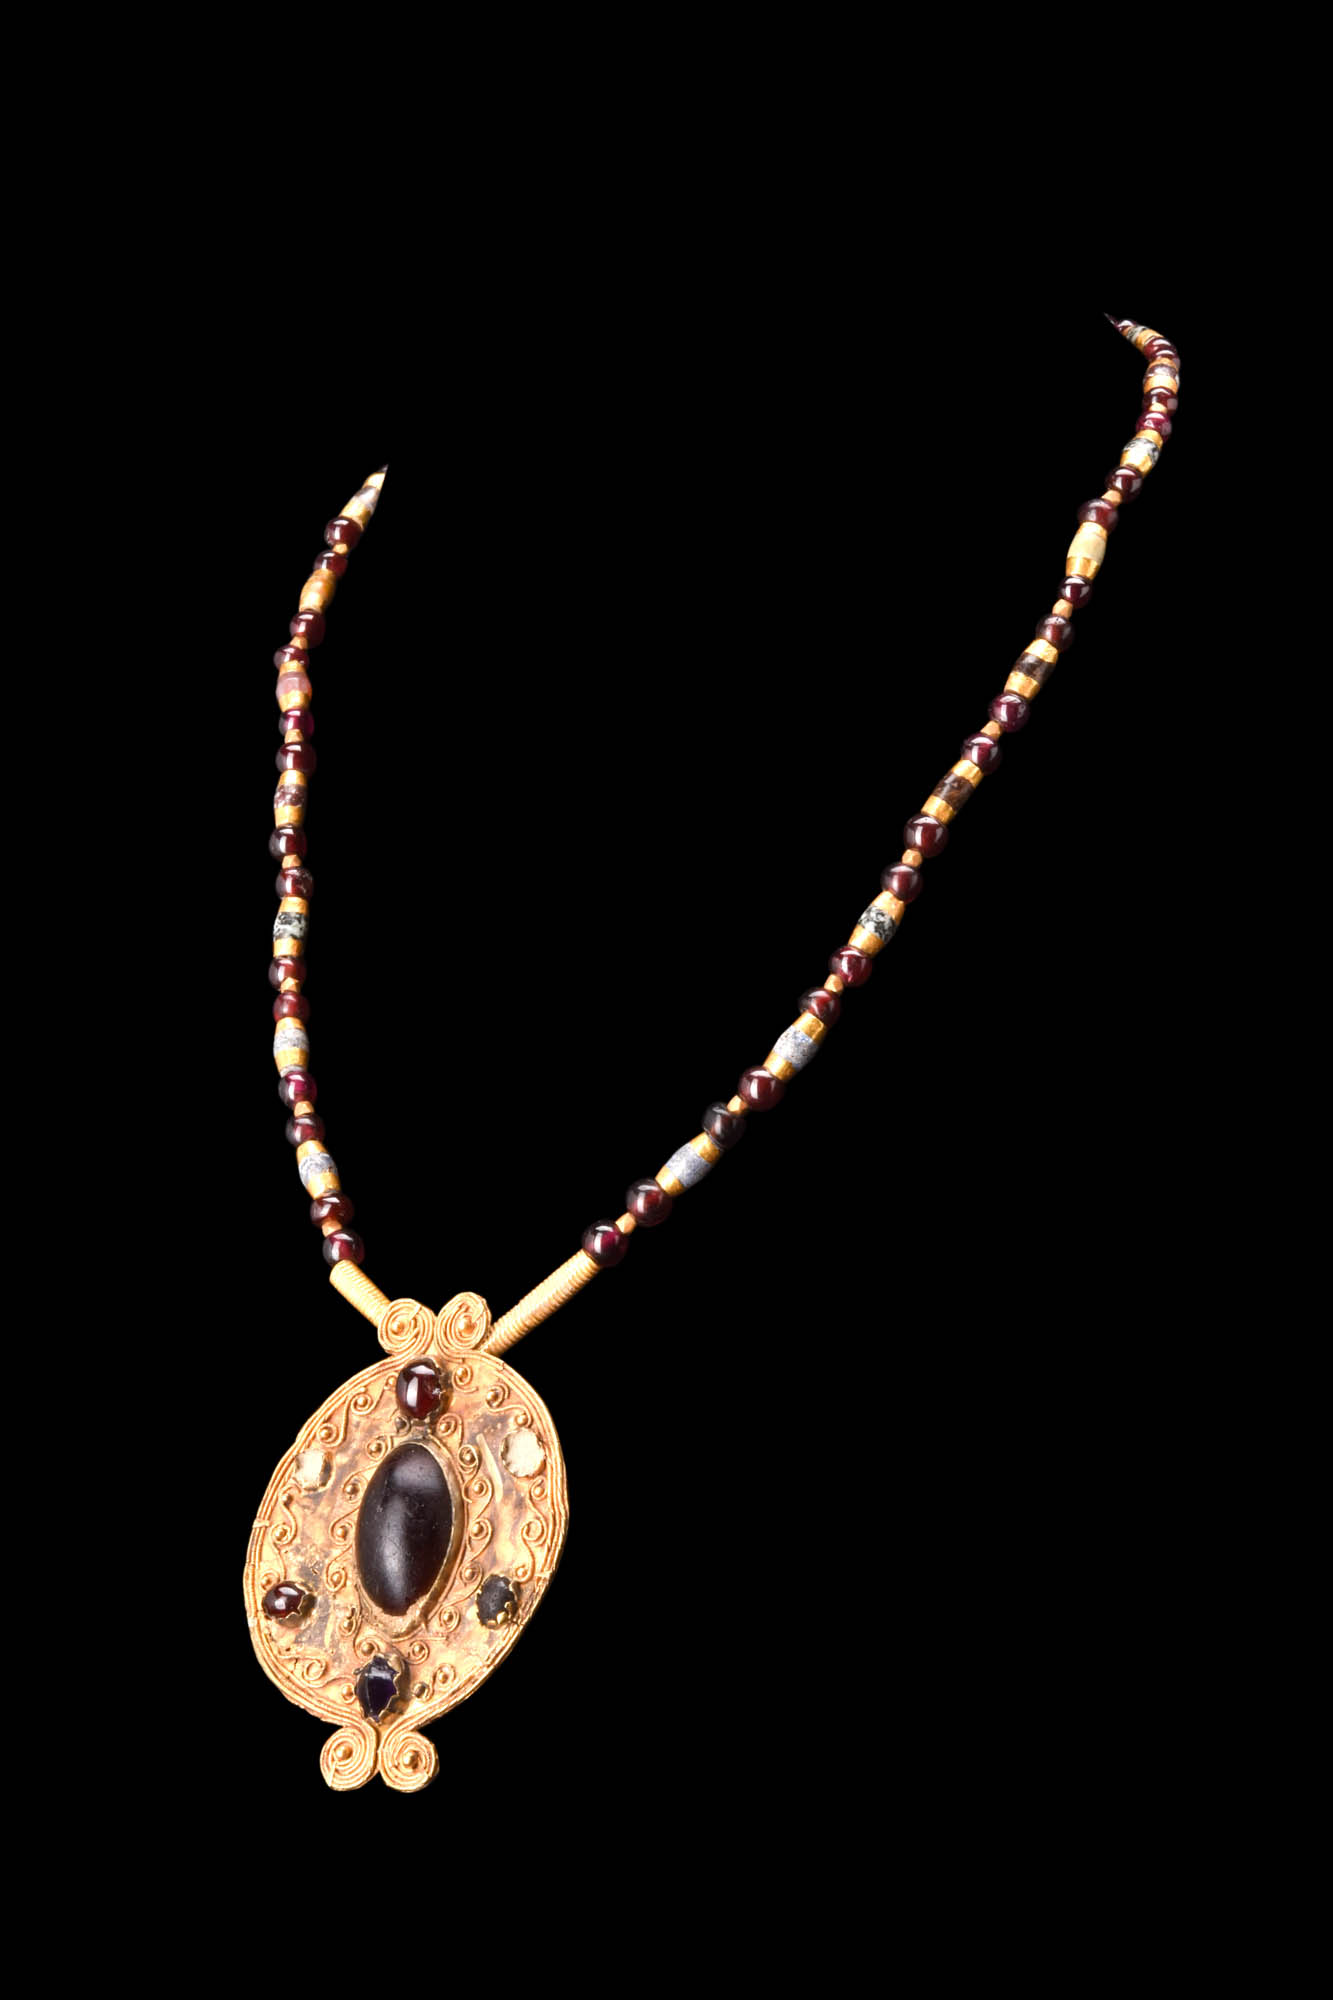 HELLENISTIC GOLD PENDANT AND NECKLACE - Image 2 of 7